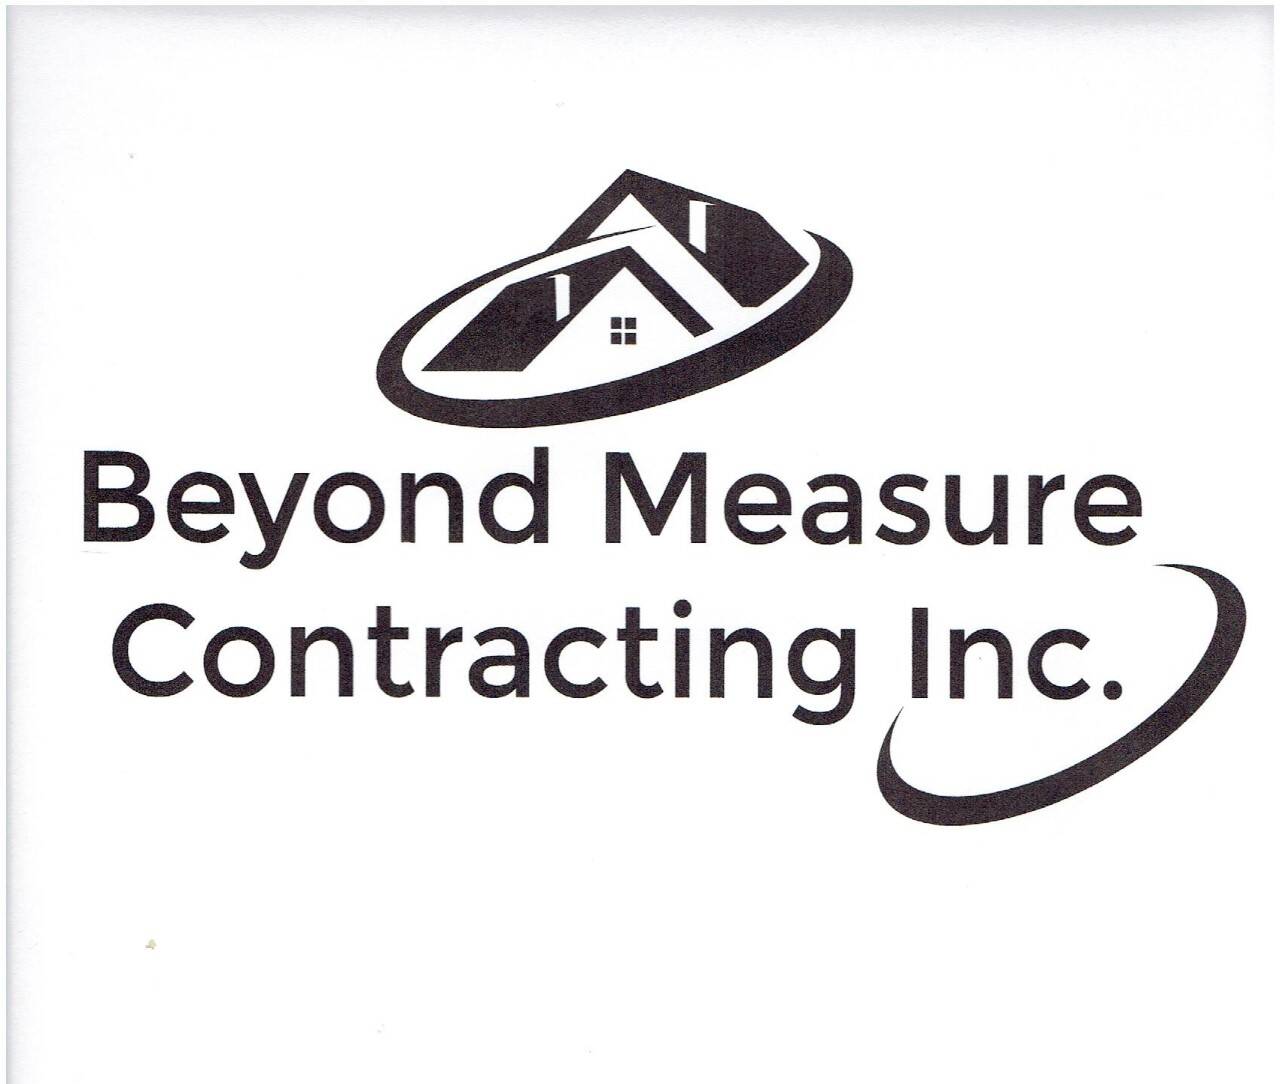 Beyond Measure Contracting Inc.